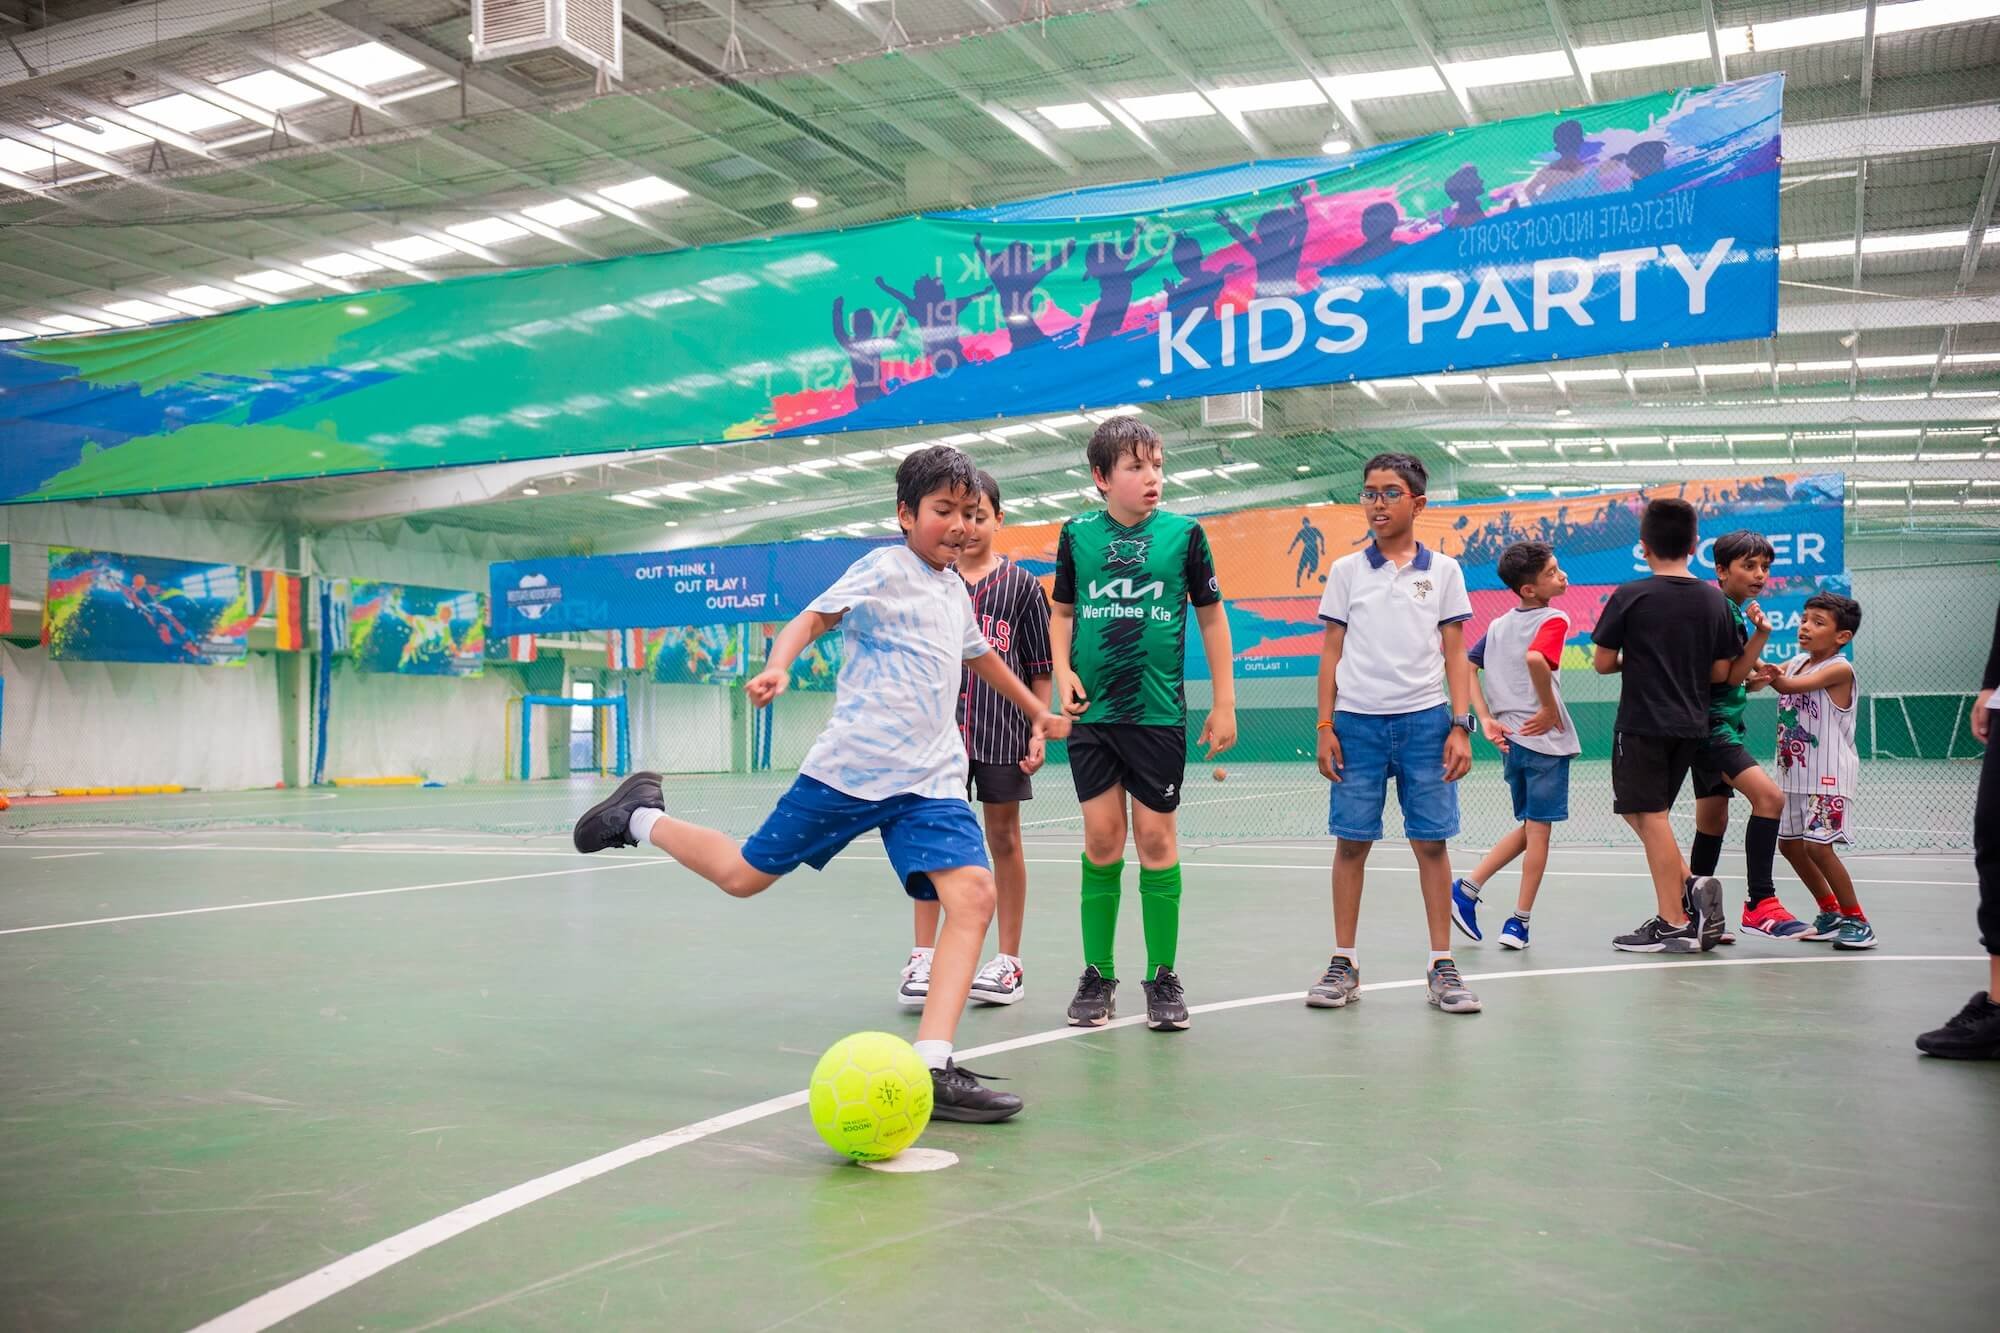 Boys Playing Indoor Soccer - Westgate Sports & Leisure Centre.jpg